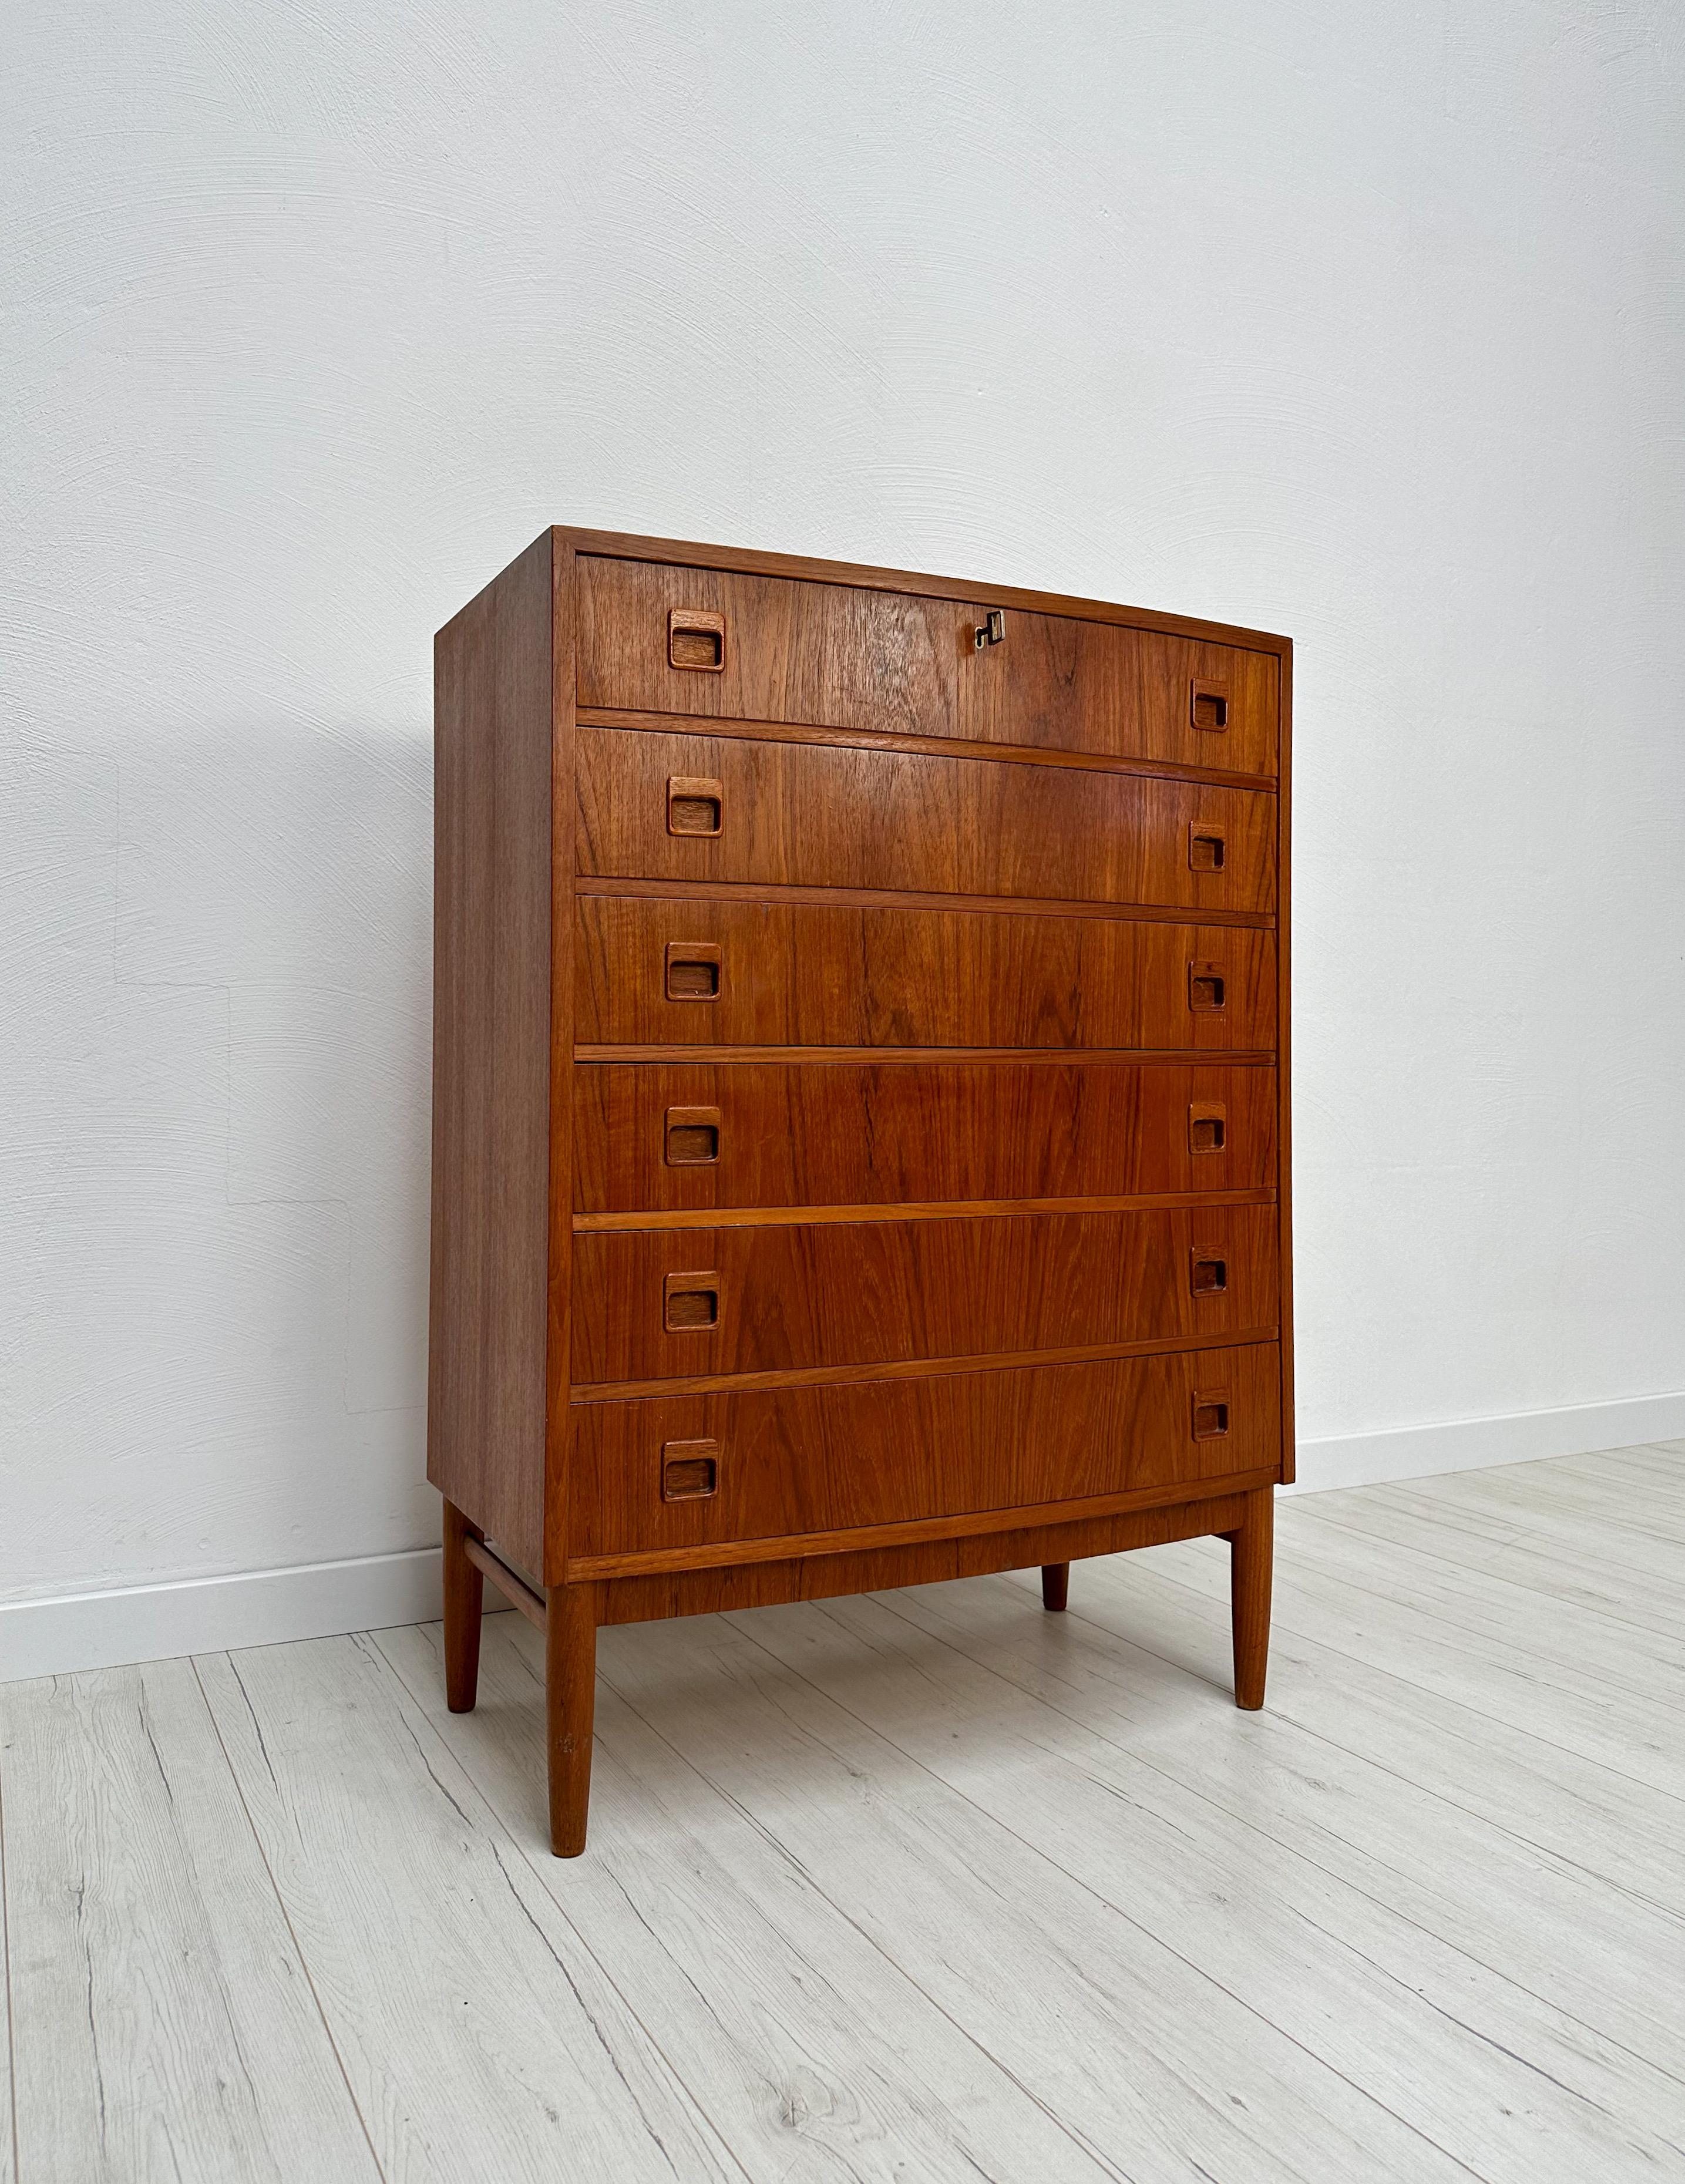 Vintage teak dresser from the 1960s, made in Denmark. Beautiful bow front with solid, sculpted teak drawers. Very neat condition with age-related signs of use.

Dimensions: W 80 x H 110.5 x D 43cm